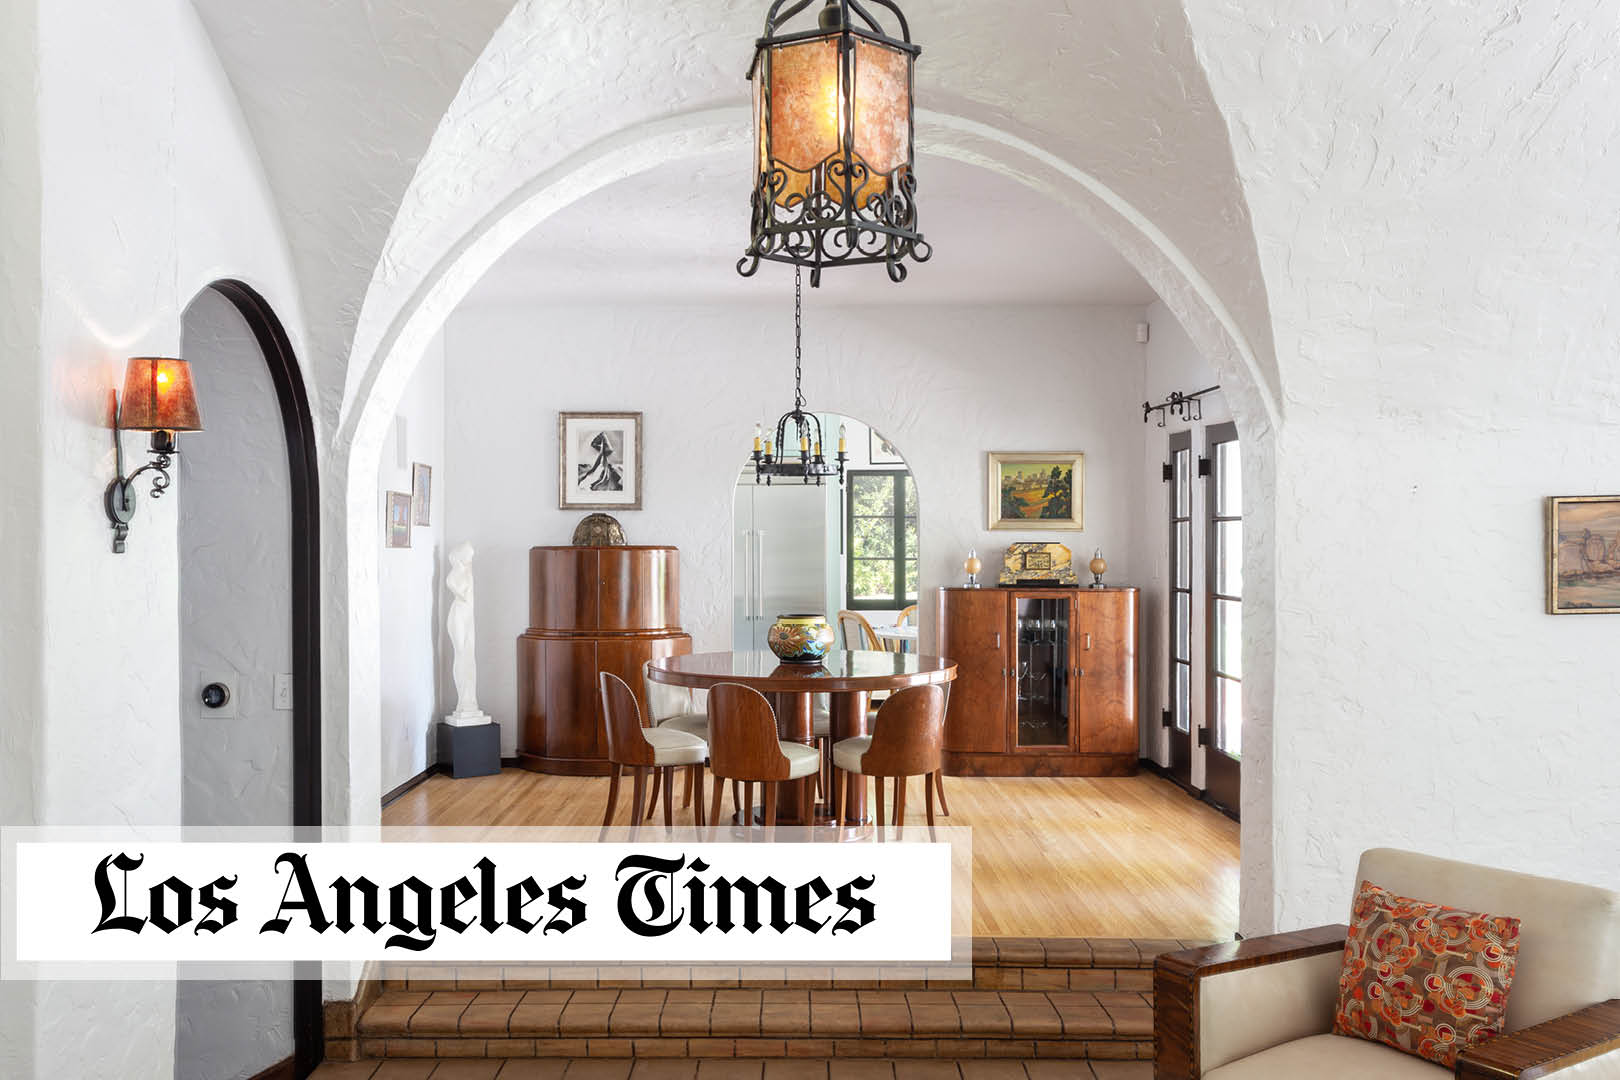 Los Angeles Times: Calori House Finds a Buyer